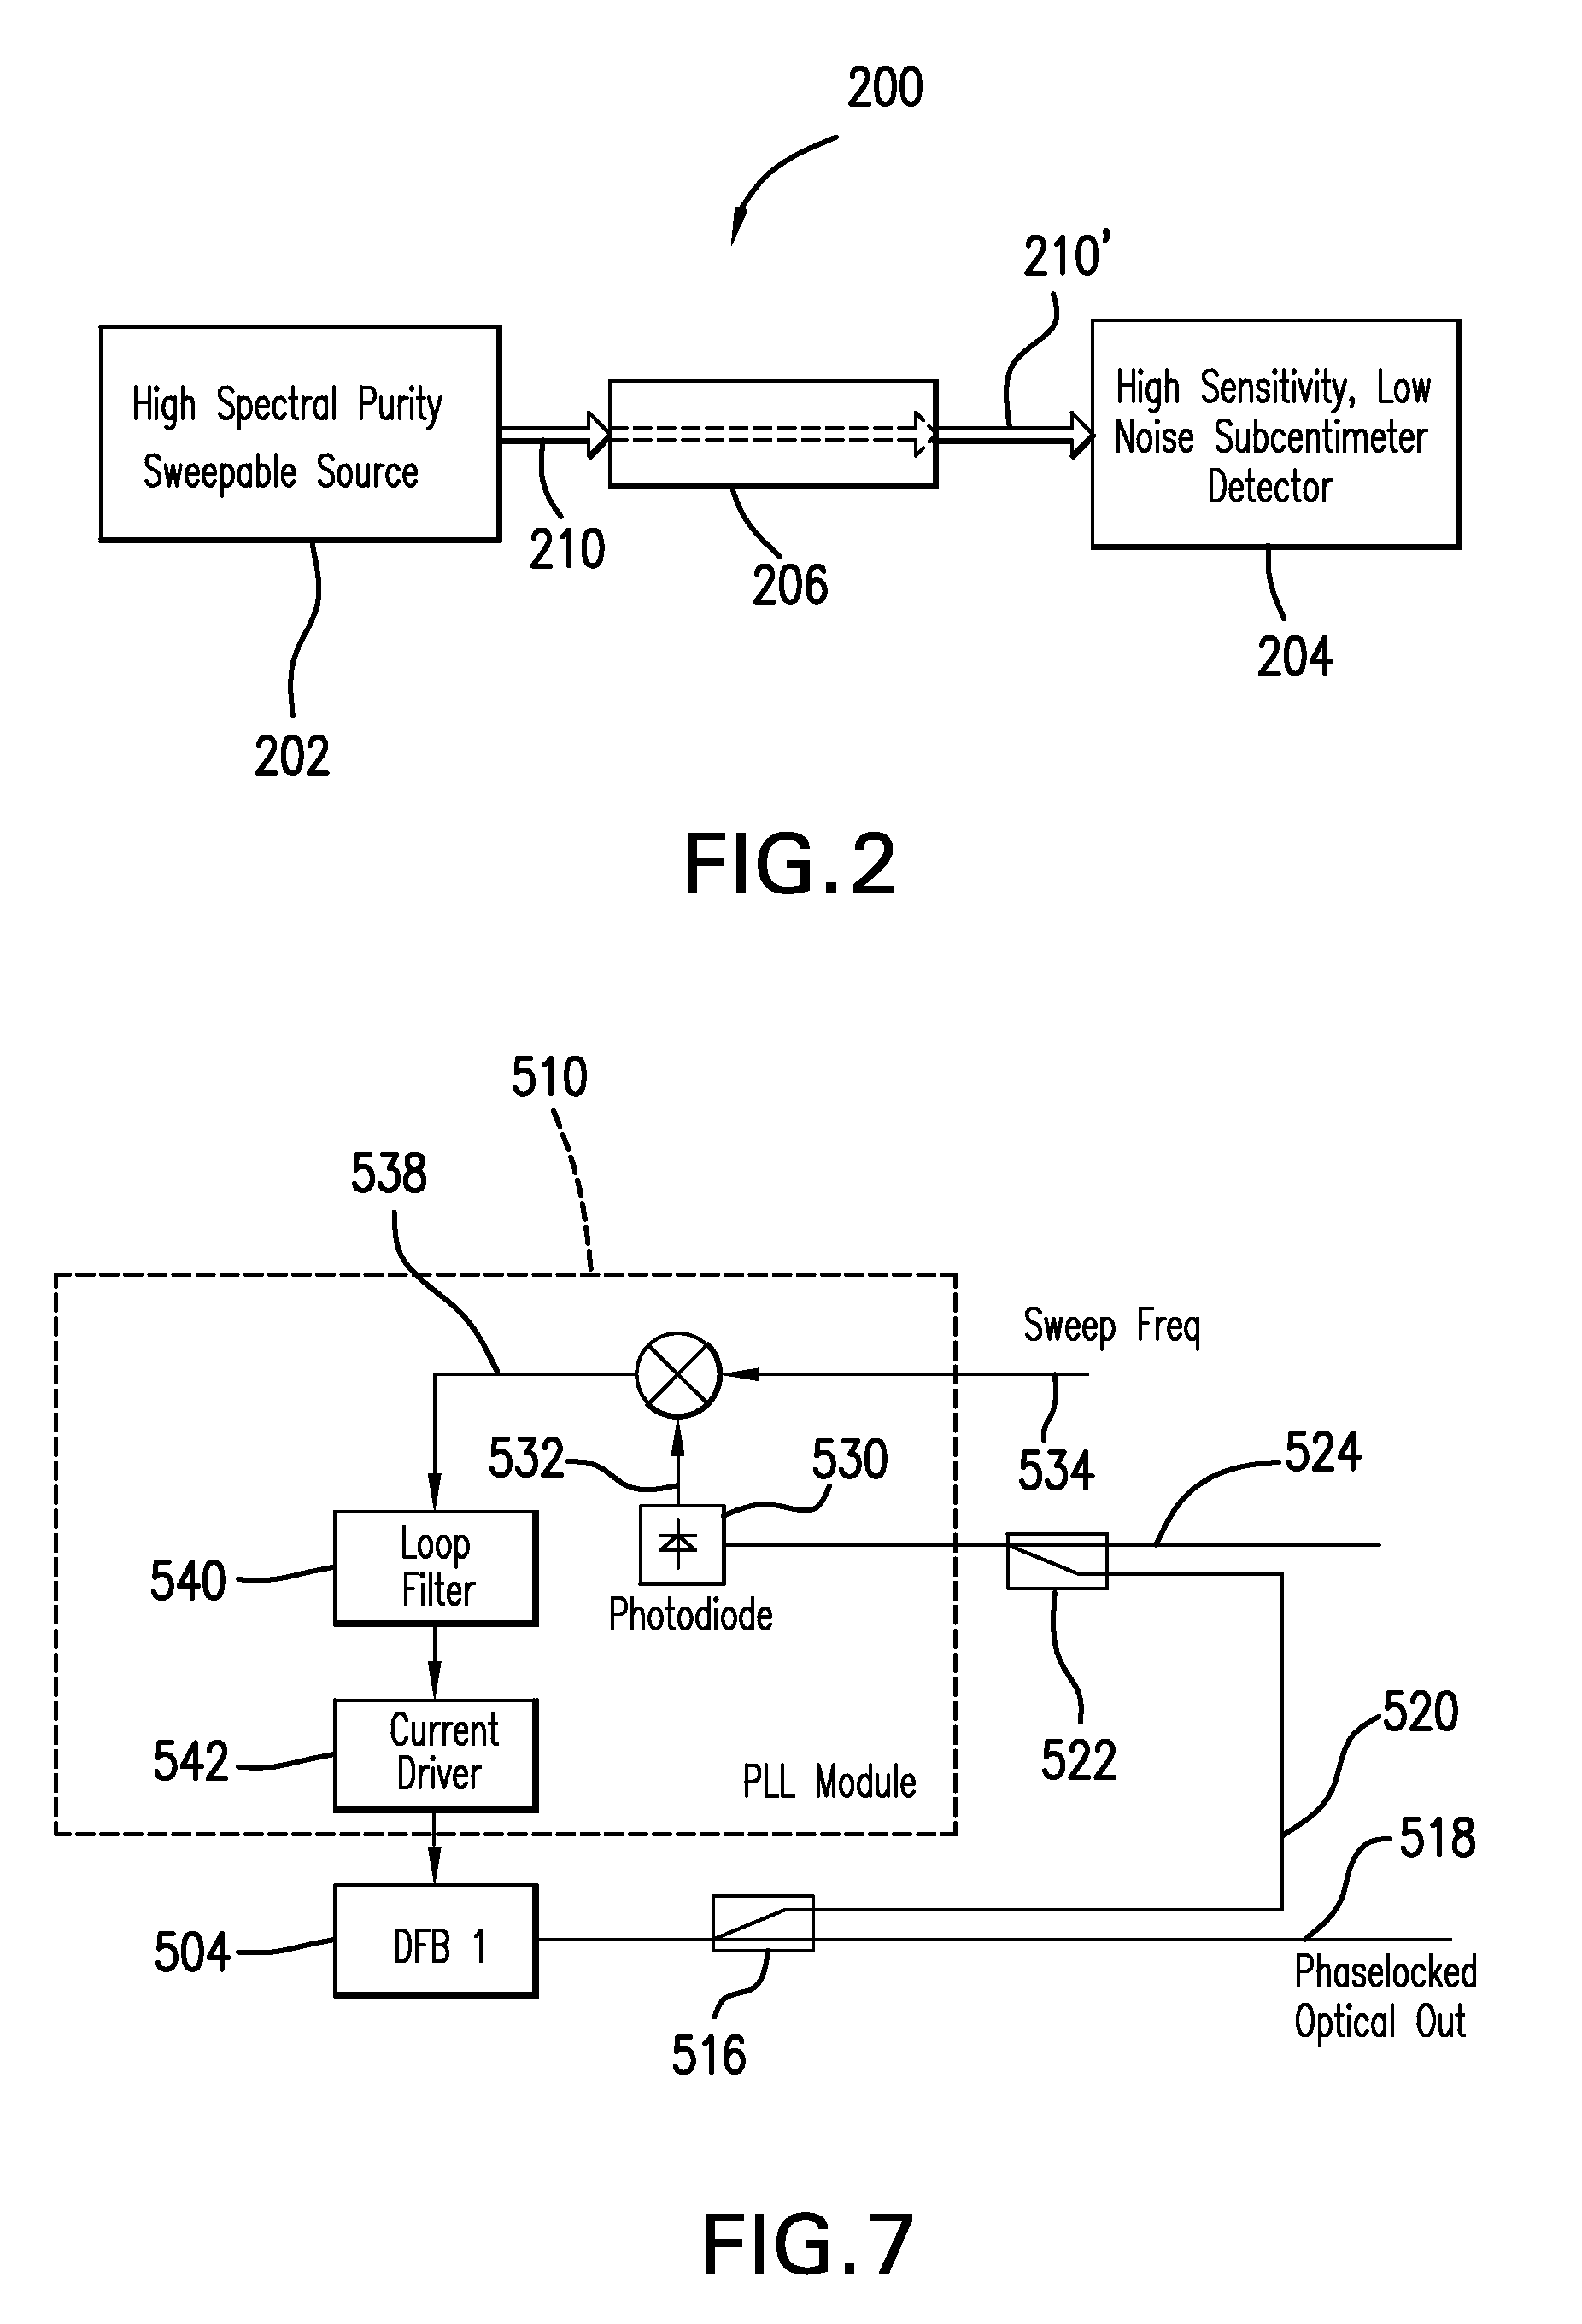 Subcentimeter radiation detection and frequency domain spectroscopy